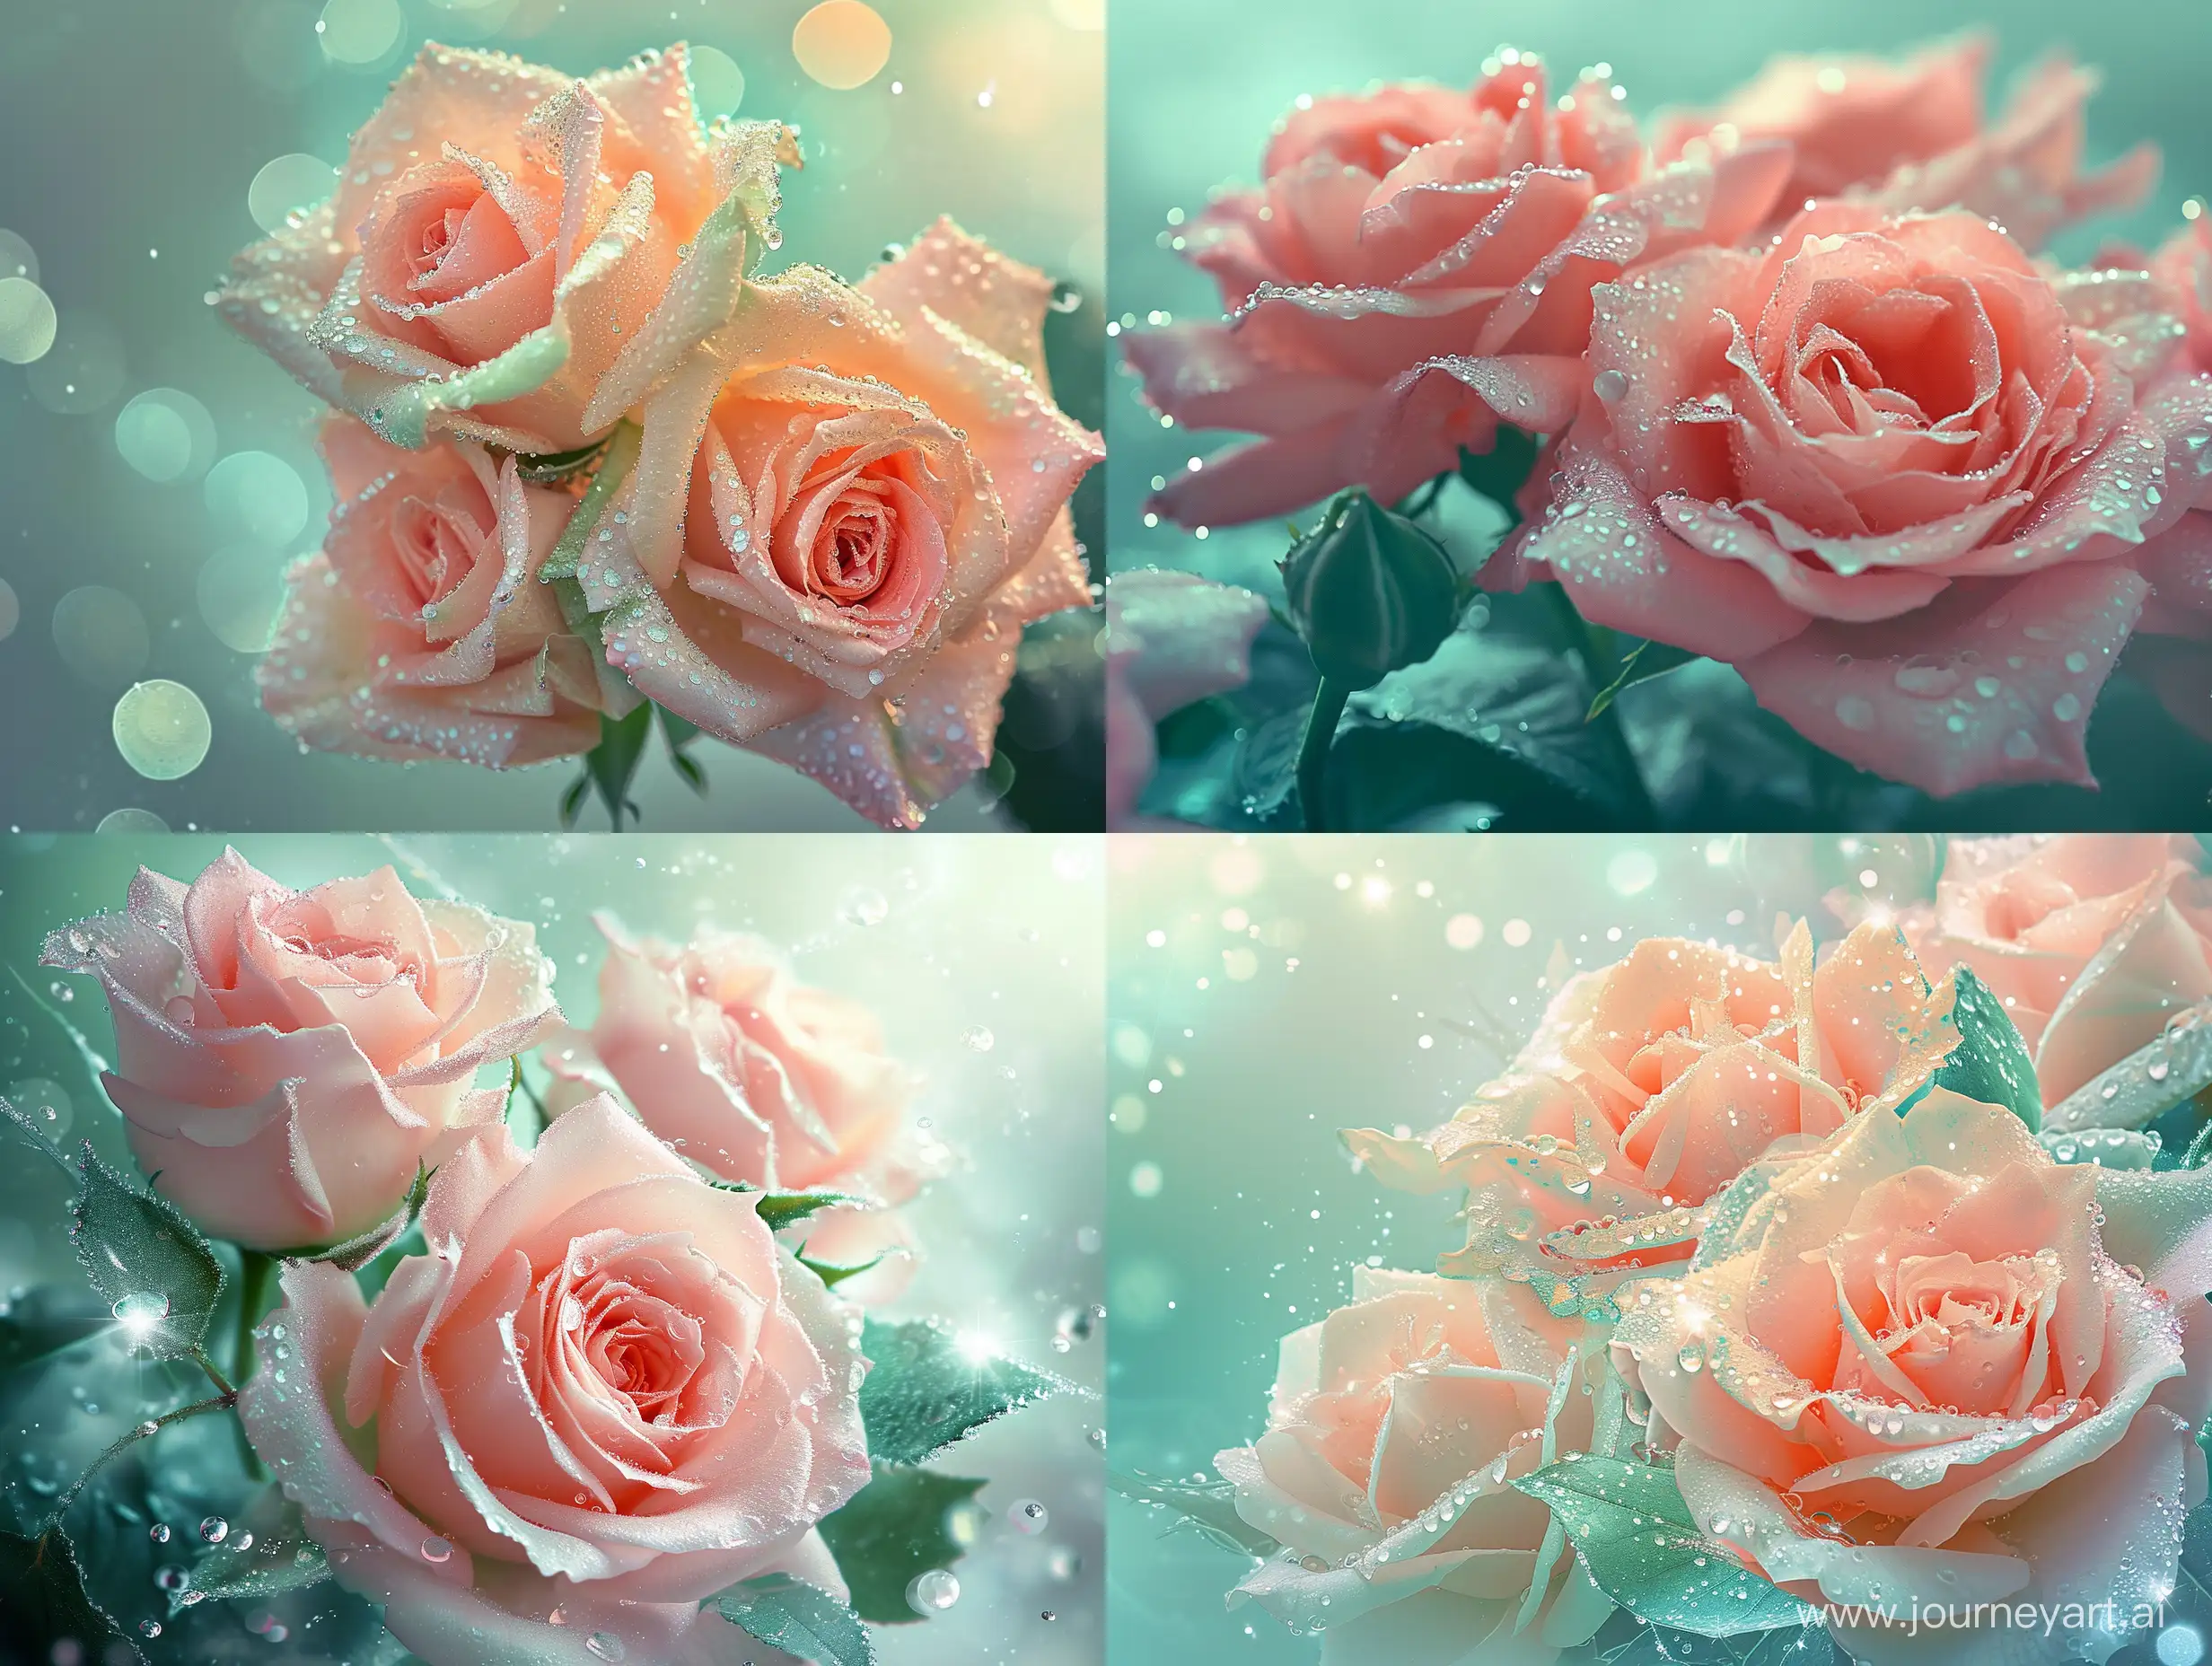 Enchanting-Minty-Rose-Bouquet-with-Sparkling-Dewdrops-at-Dawn